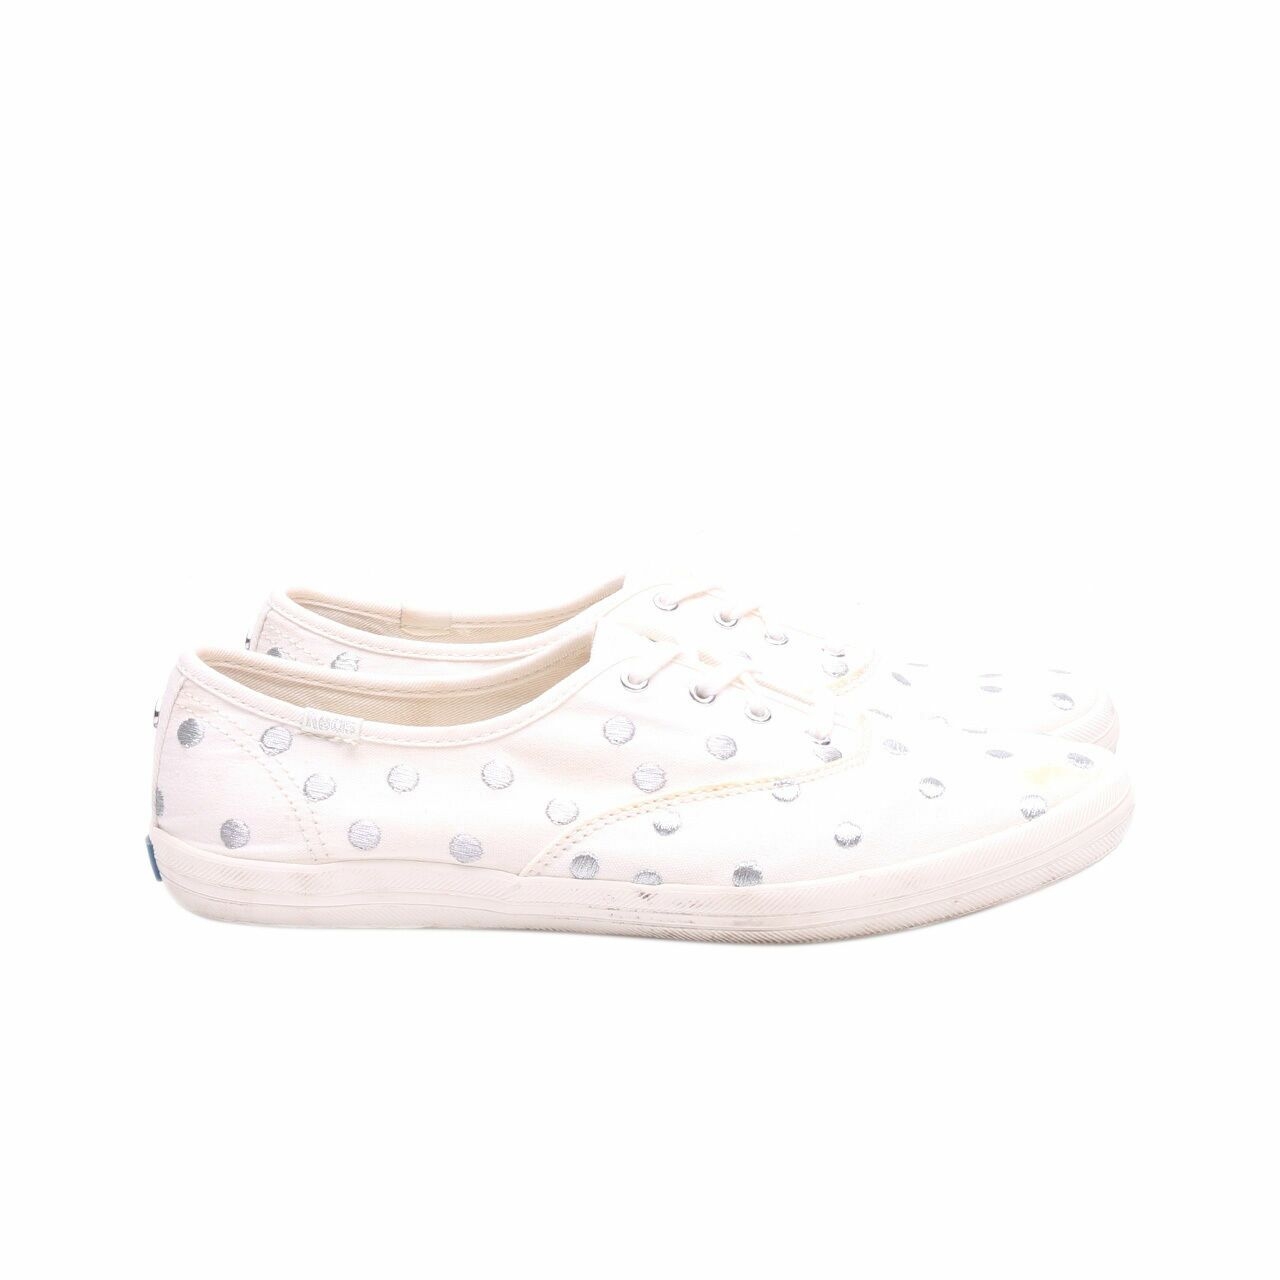 Keds For Kate Spade Silver & White Polkadots Sneakers